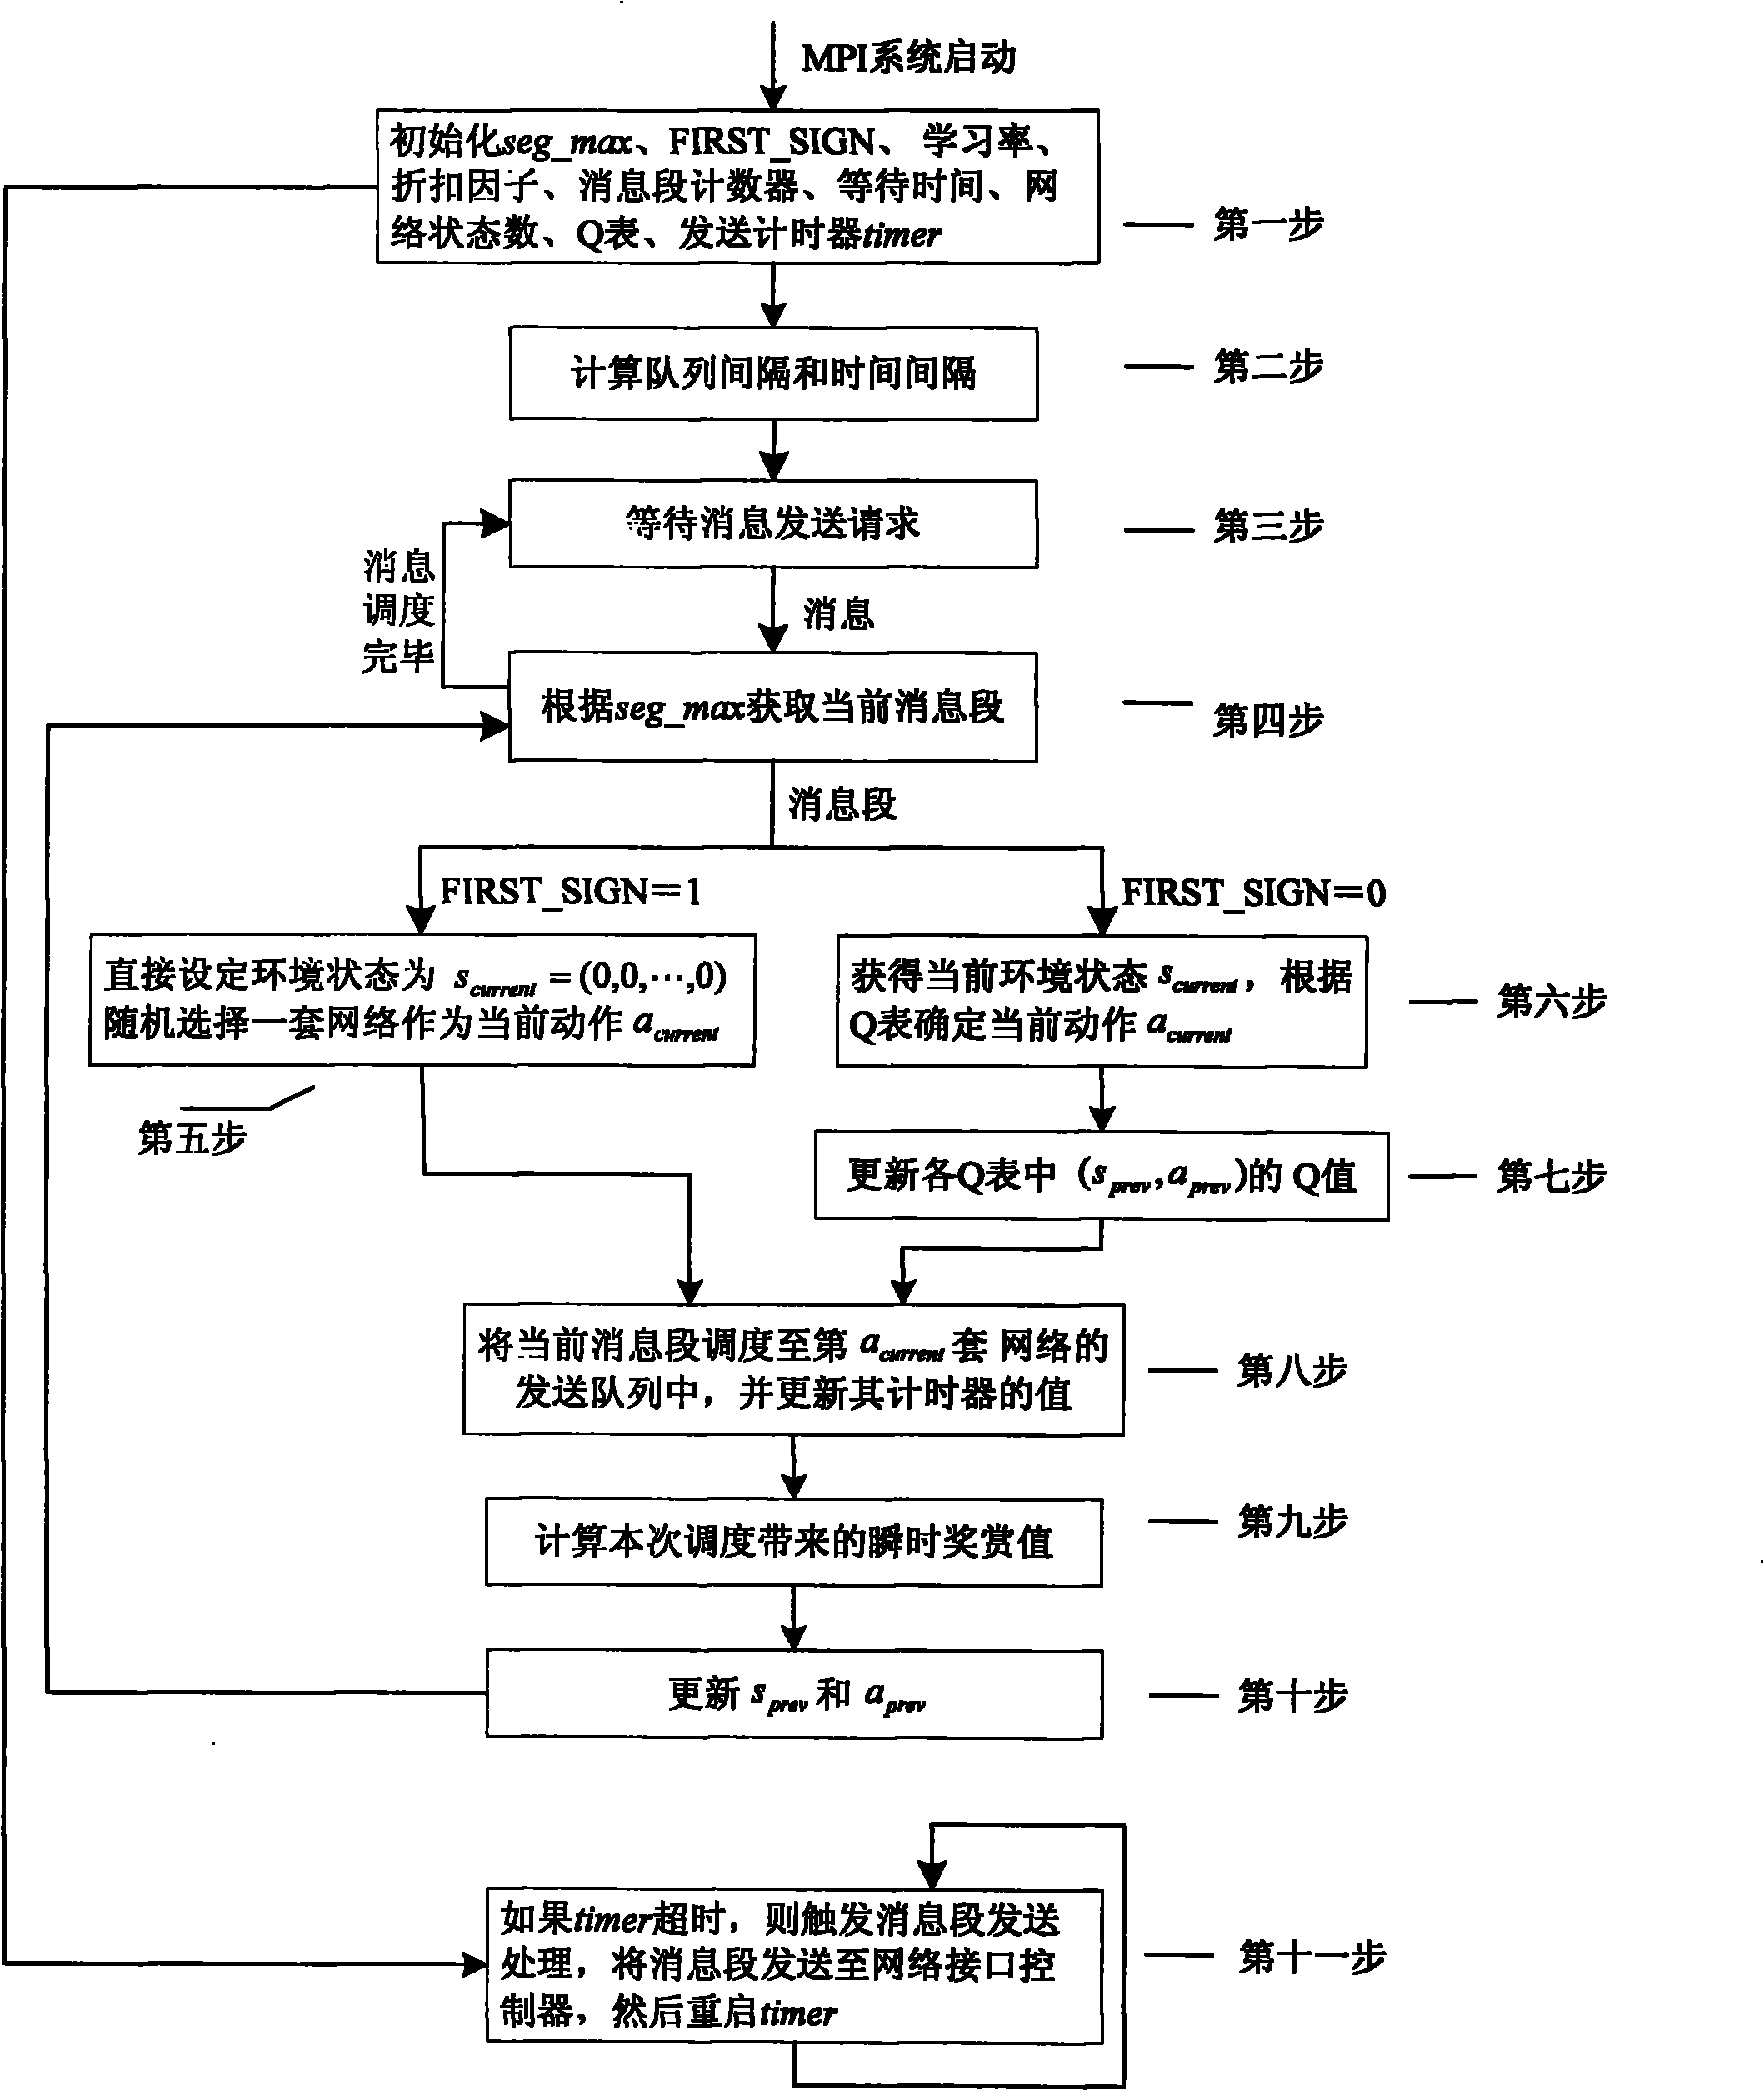 MPI (Moldflow Plastics Insight) information scheduling method based on reinforcement learning under multi-network environment